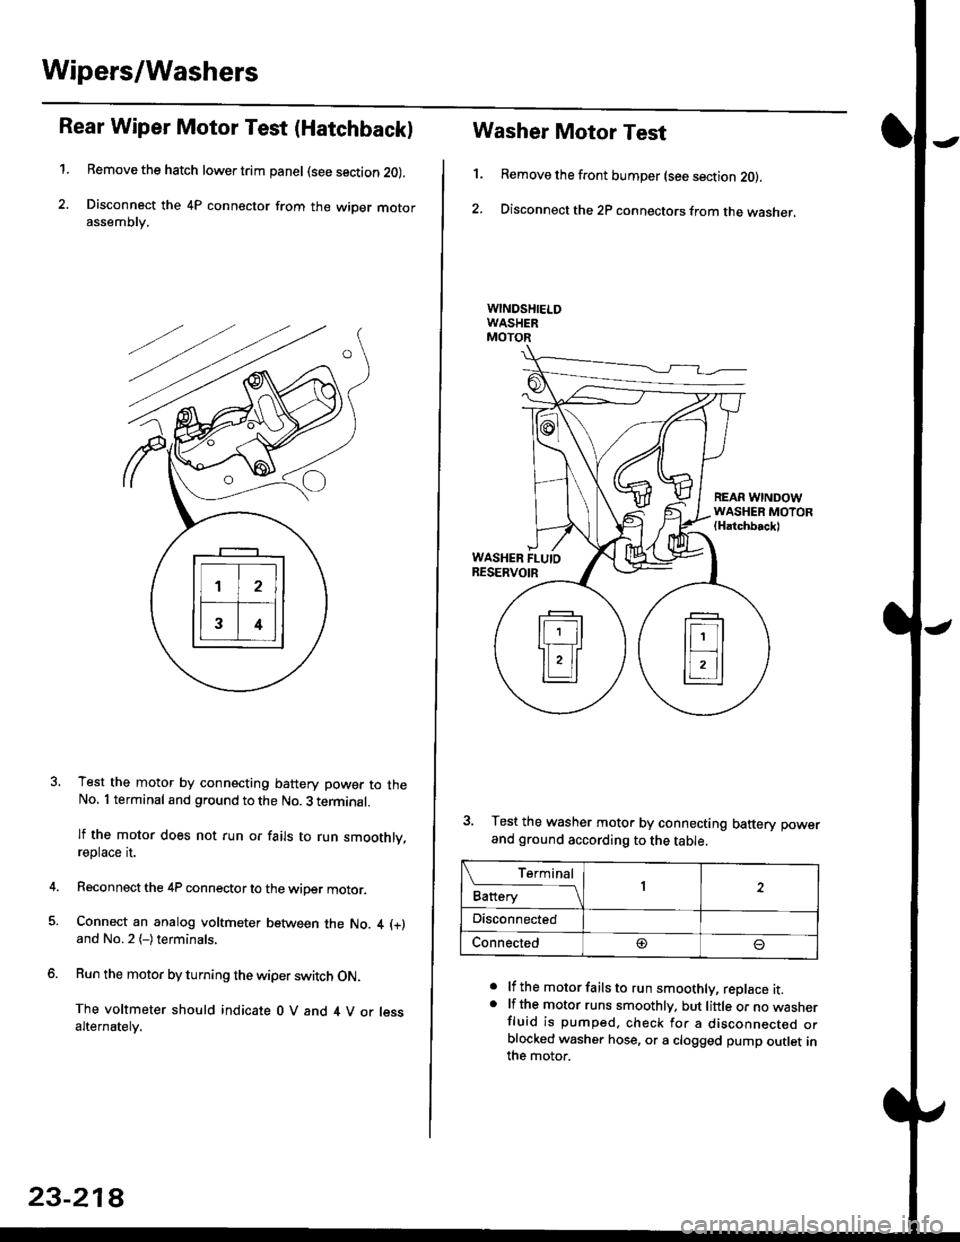 HONDA CIVIC 1998 6.G Workshop Manual Wipers/Washers
Rear Wiper Motor Test (Hatchback)
1.Remove the hatch lower trim panel (see section 20).
Disconnect the 4P connector from the wiper motorassemDry,
Test the motor by connecting battery po